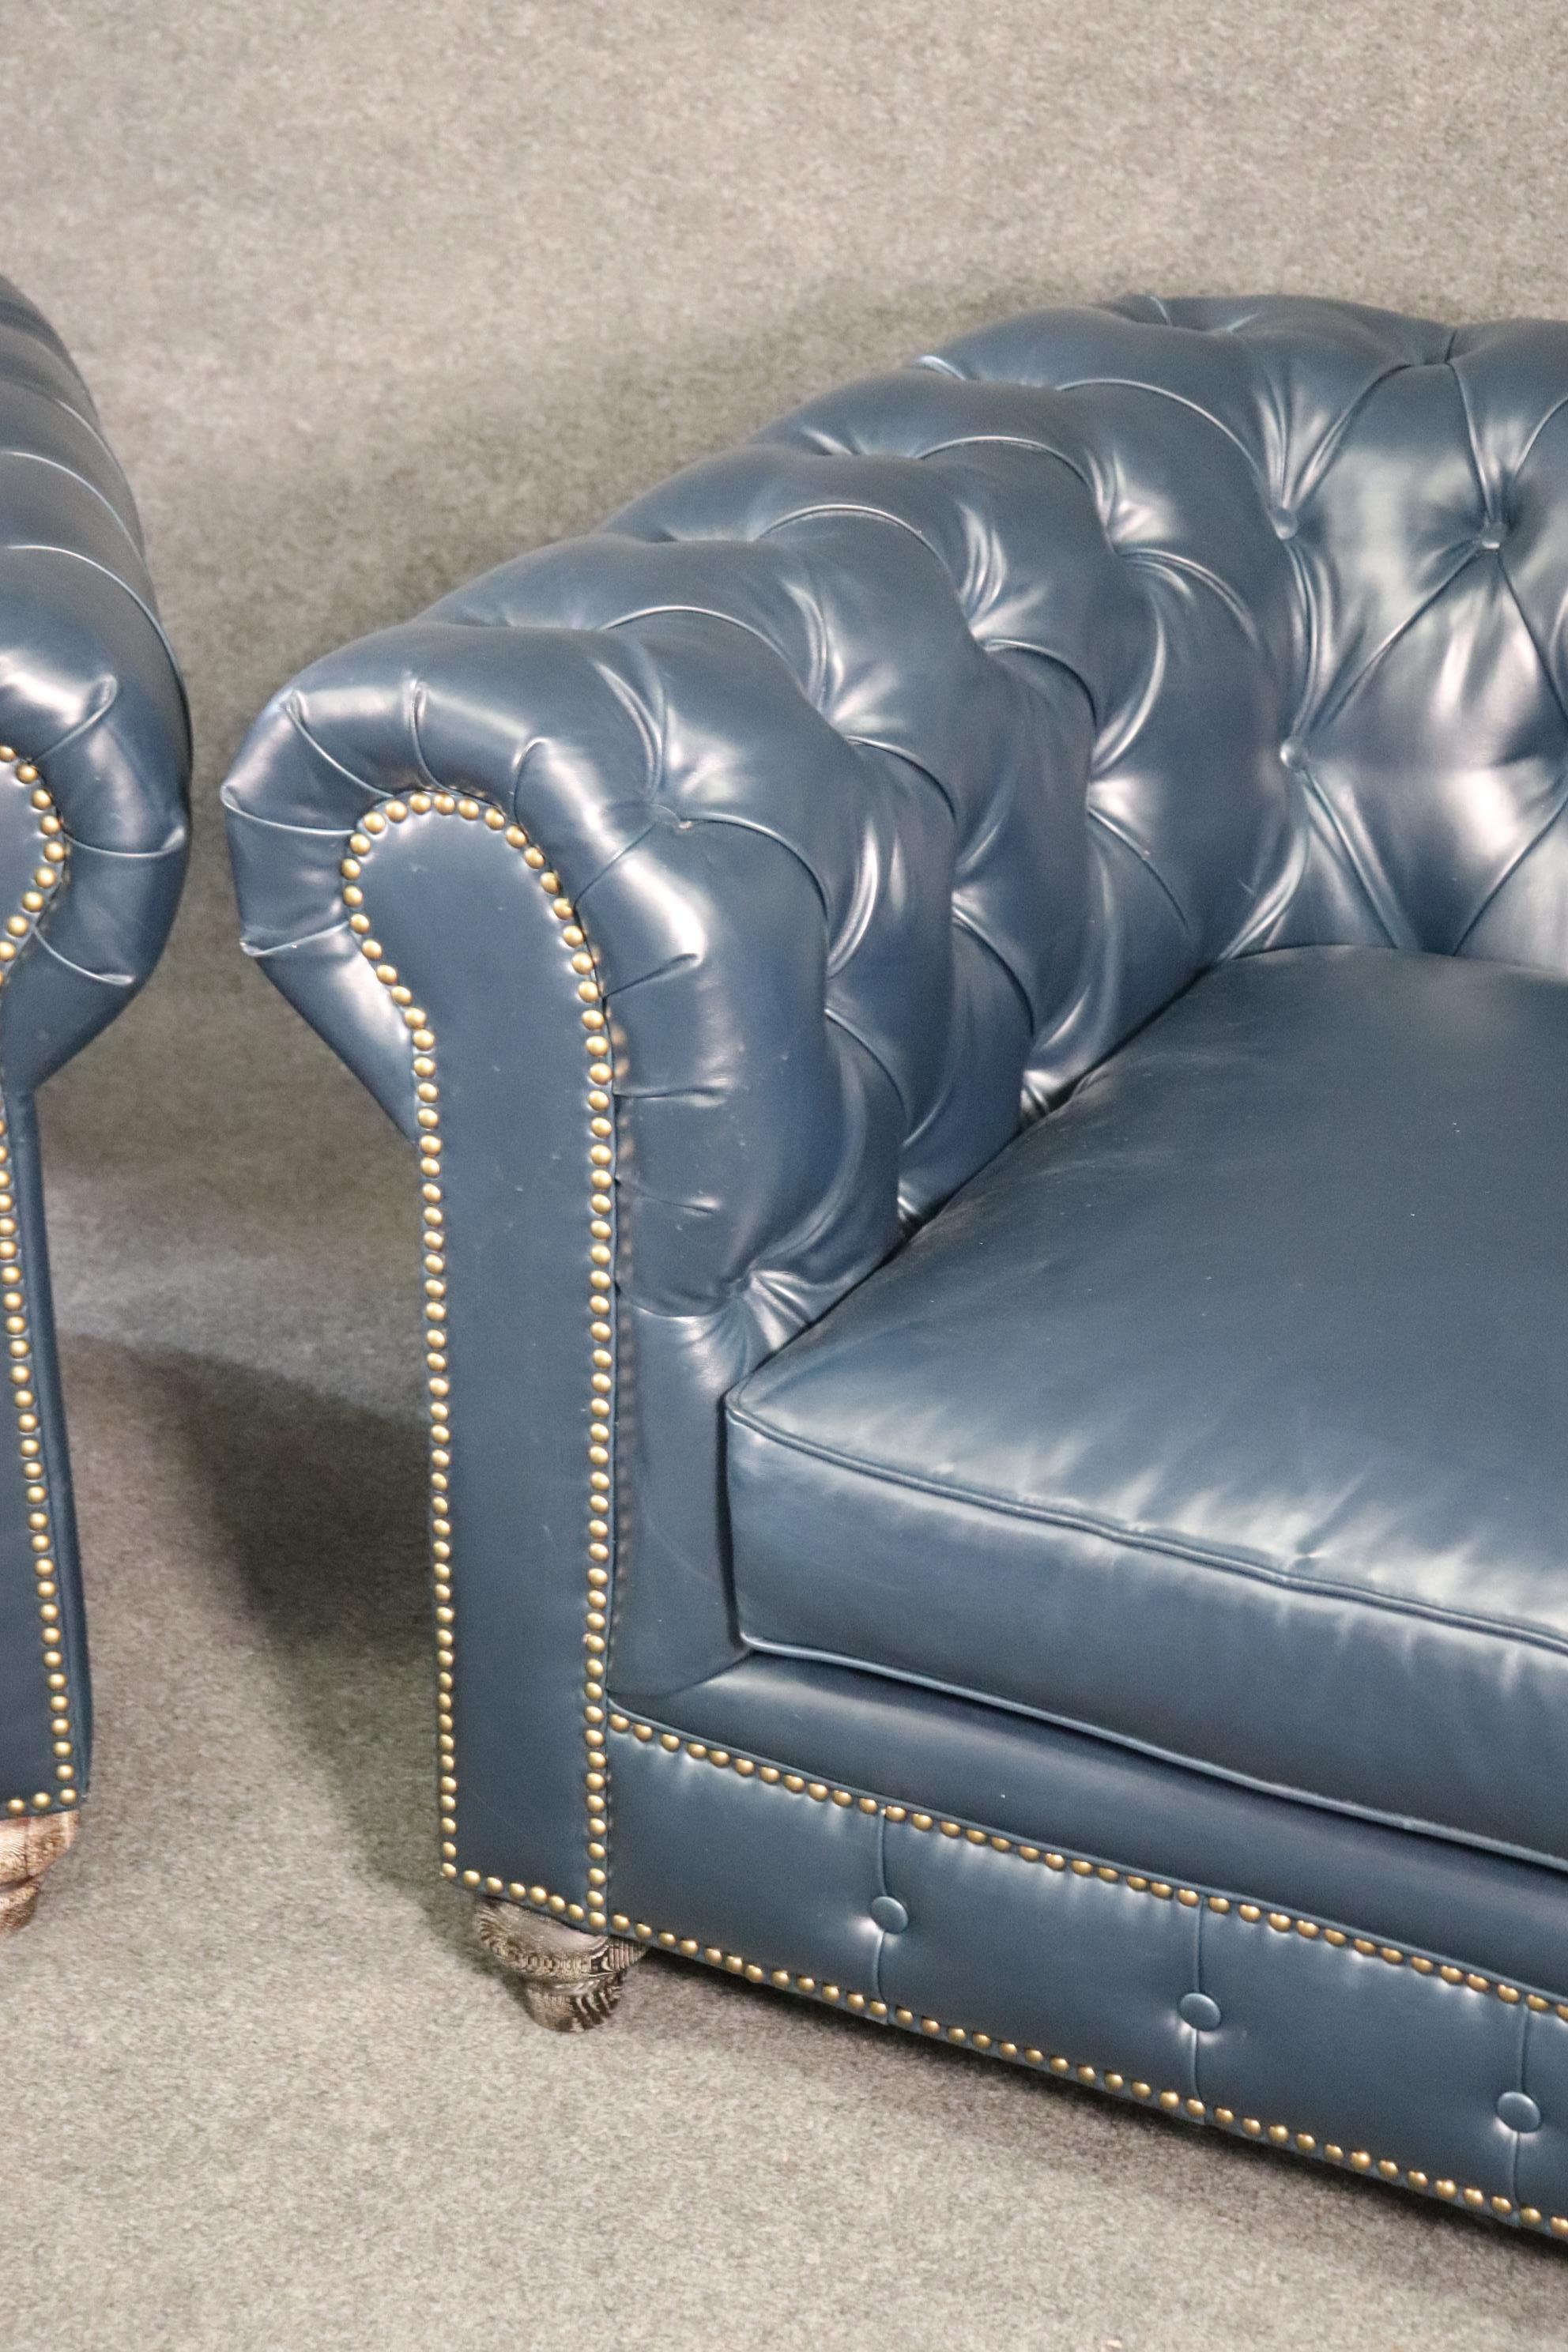 Pair High Quality Genuine Top Grain Leather Chesterfield Club Chairs Navy Blue 7